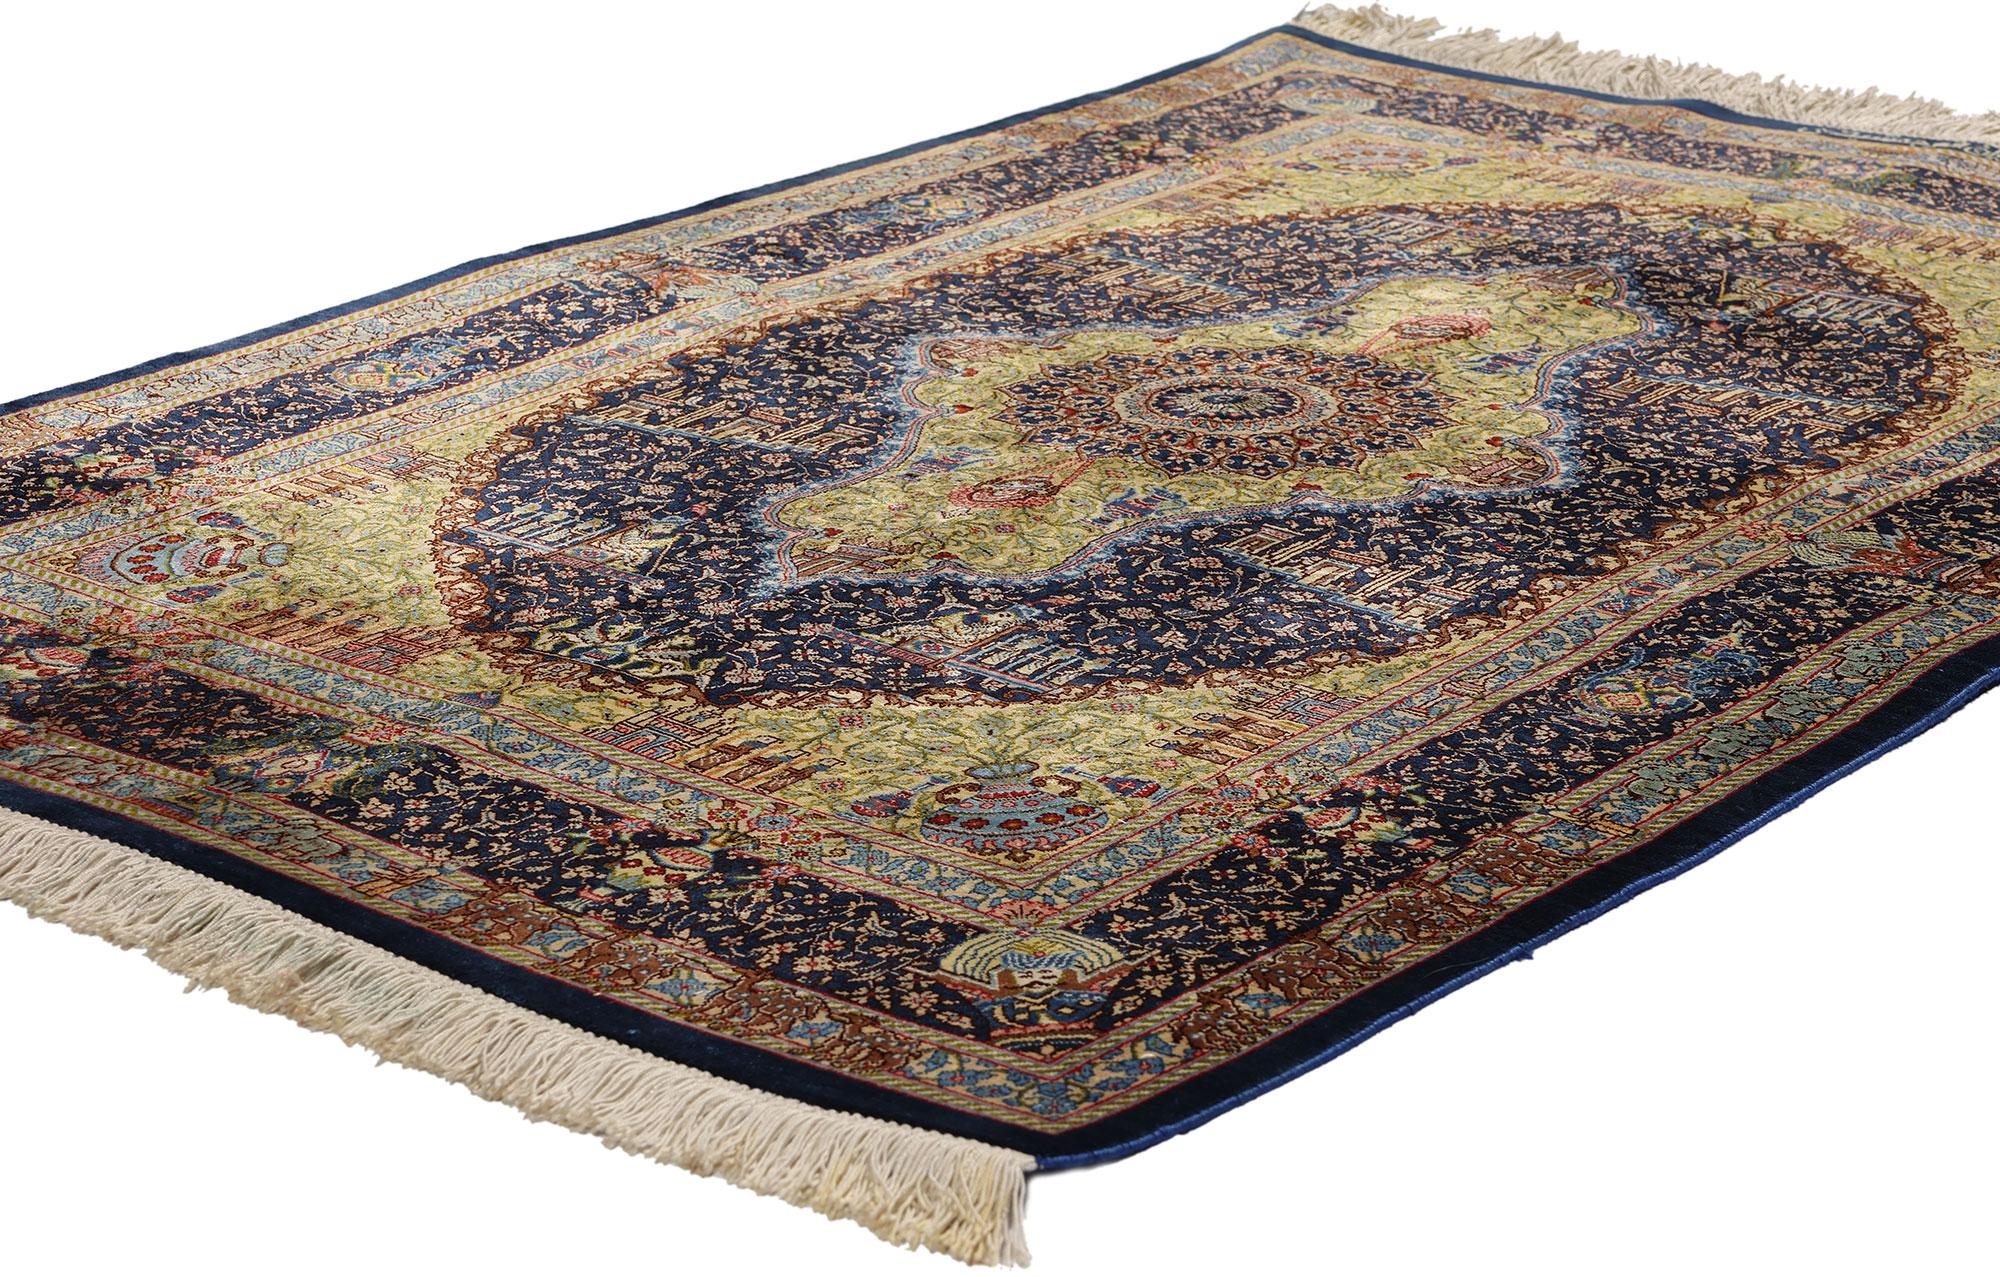 78717 Vintage Persian Jamshidi Silk Qum Rug, 02'08 x 04'00. The Jamshidi Silk Qum rug is an exquisite and sought-after type of Persian rug crafted in the city of Qom, Iran. Renowned for its use of silk fibers, this luxurious vintage Persian Qum rug